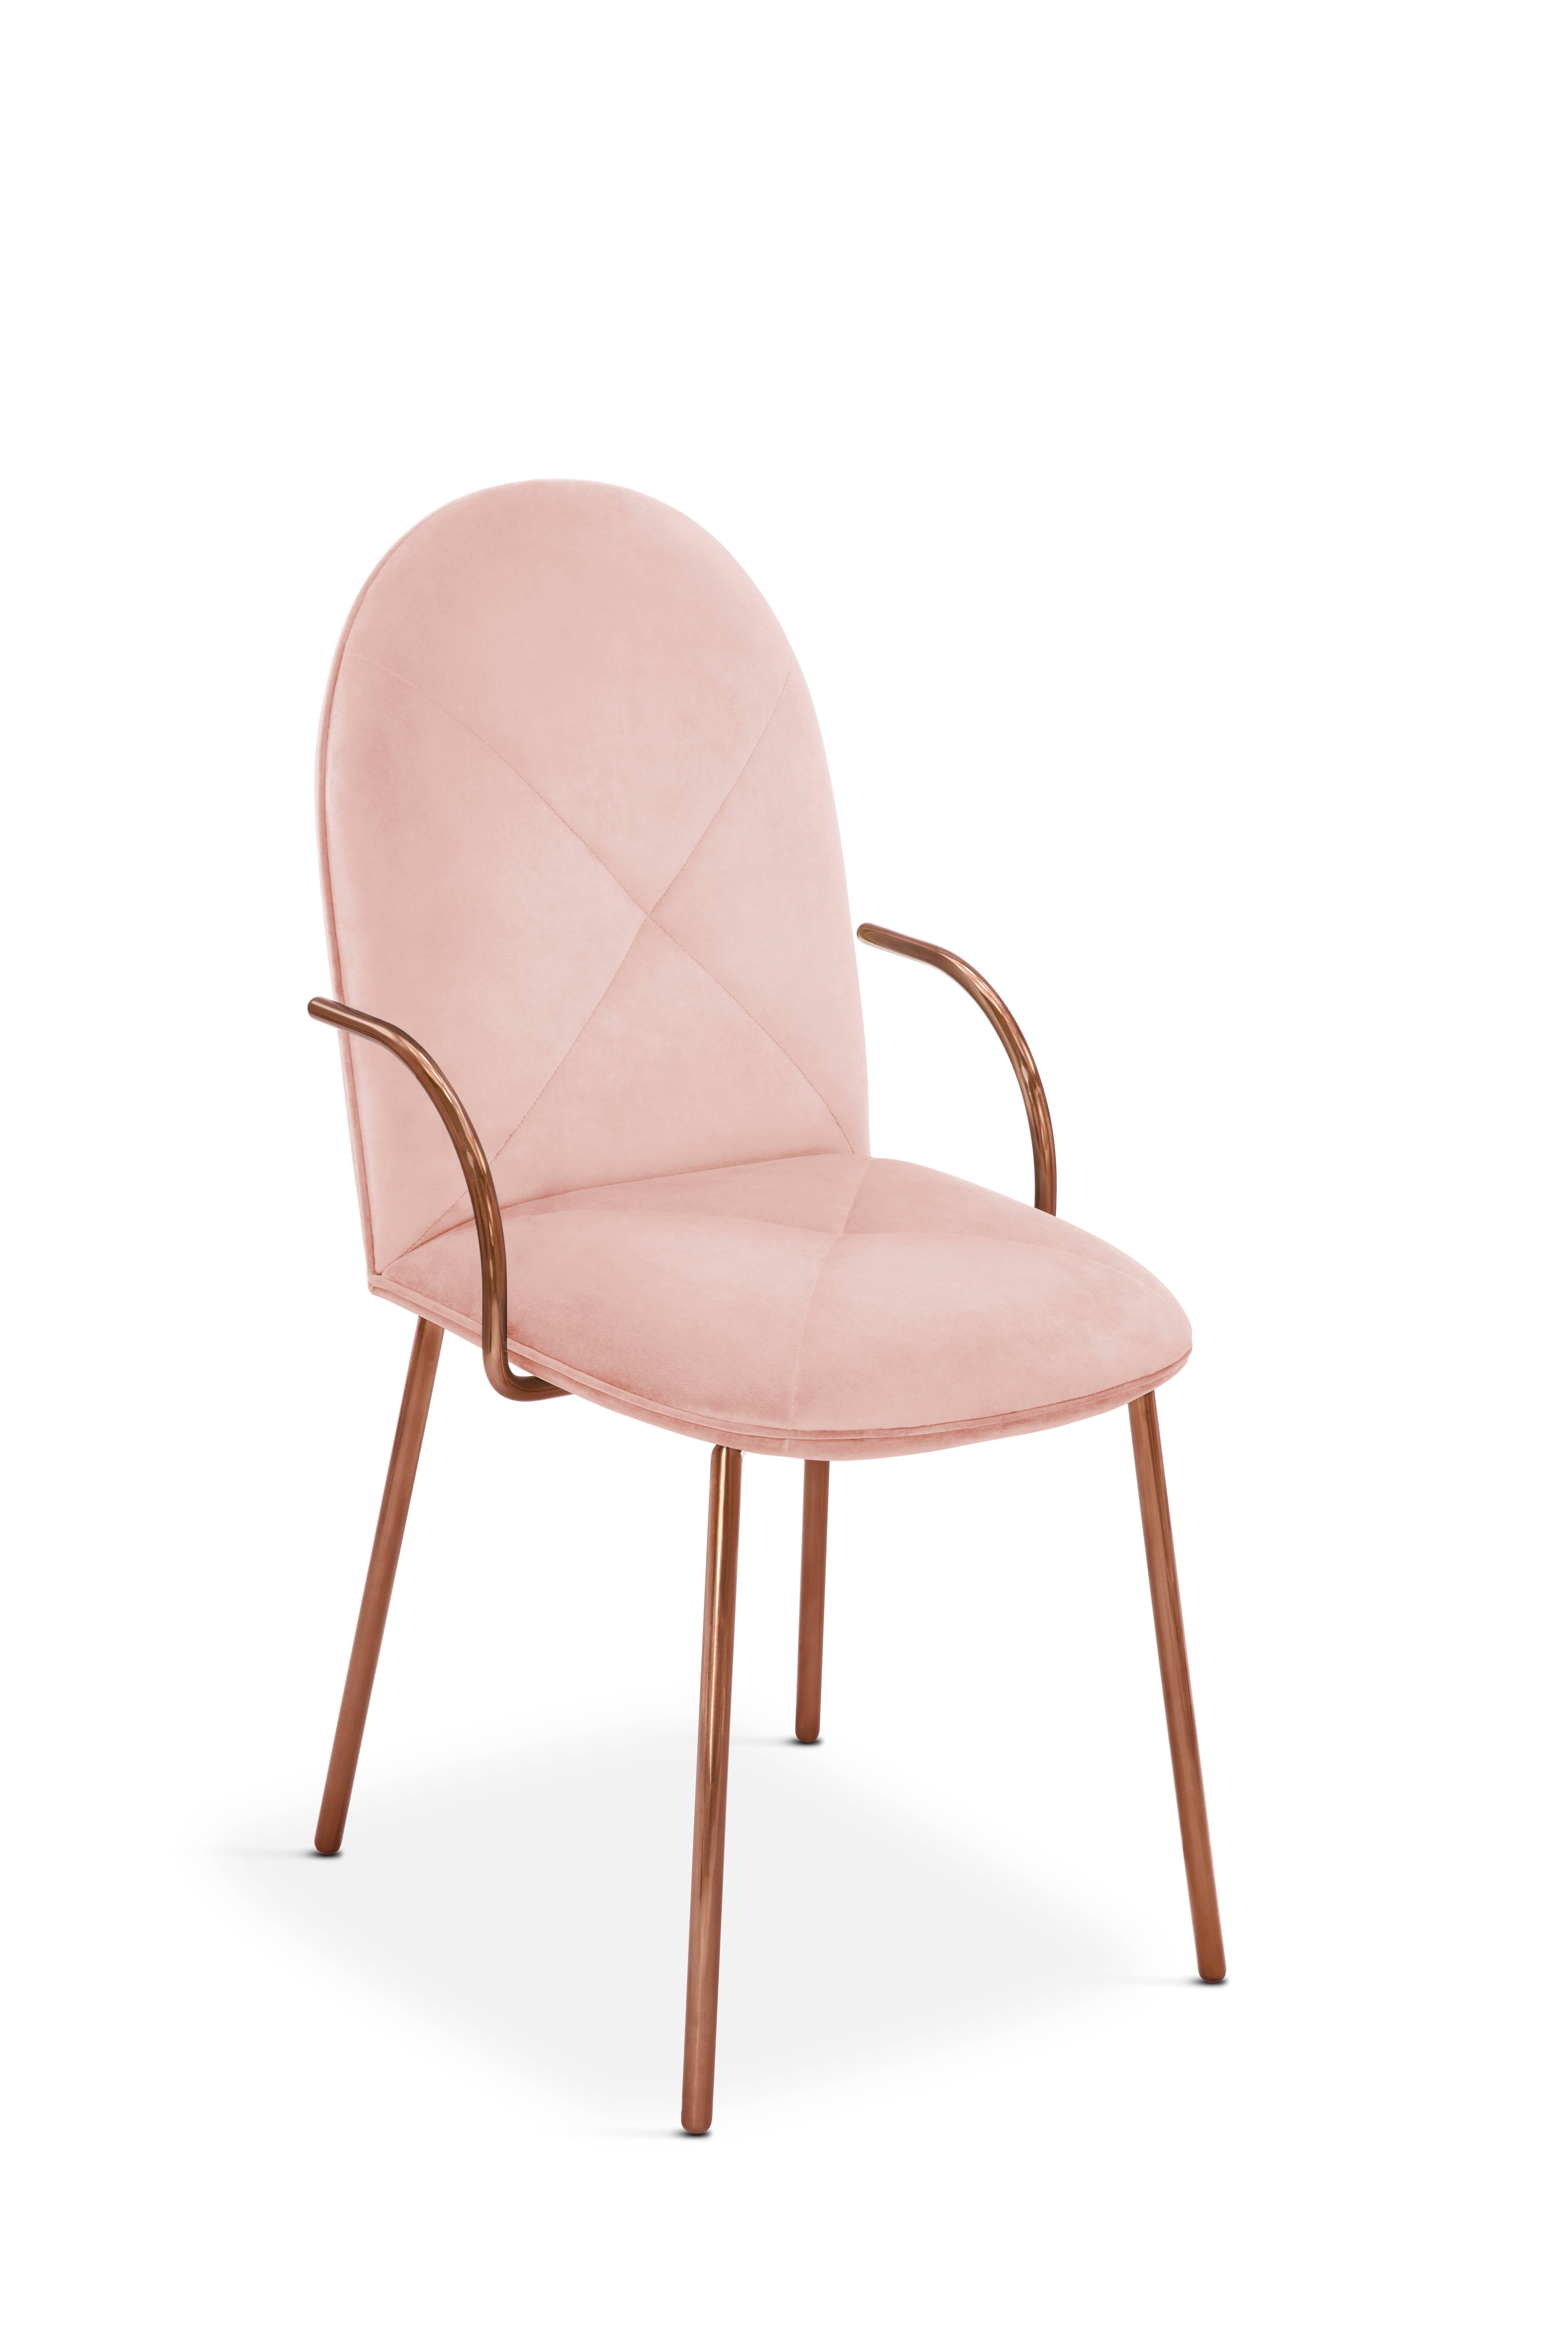 Orion chair Blush Rose by Nika Zupanc for Scarlet Splendour

The 88 constellations of the universe mysterious and magical, holding a promise to guide our destinies. Little wonder that they are the muse for the 88 Secrets, Nika Zupanc’s debut